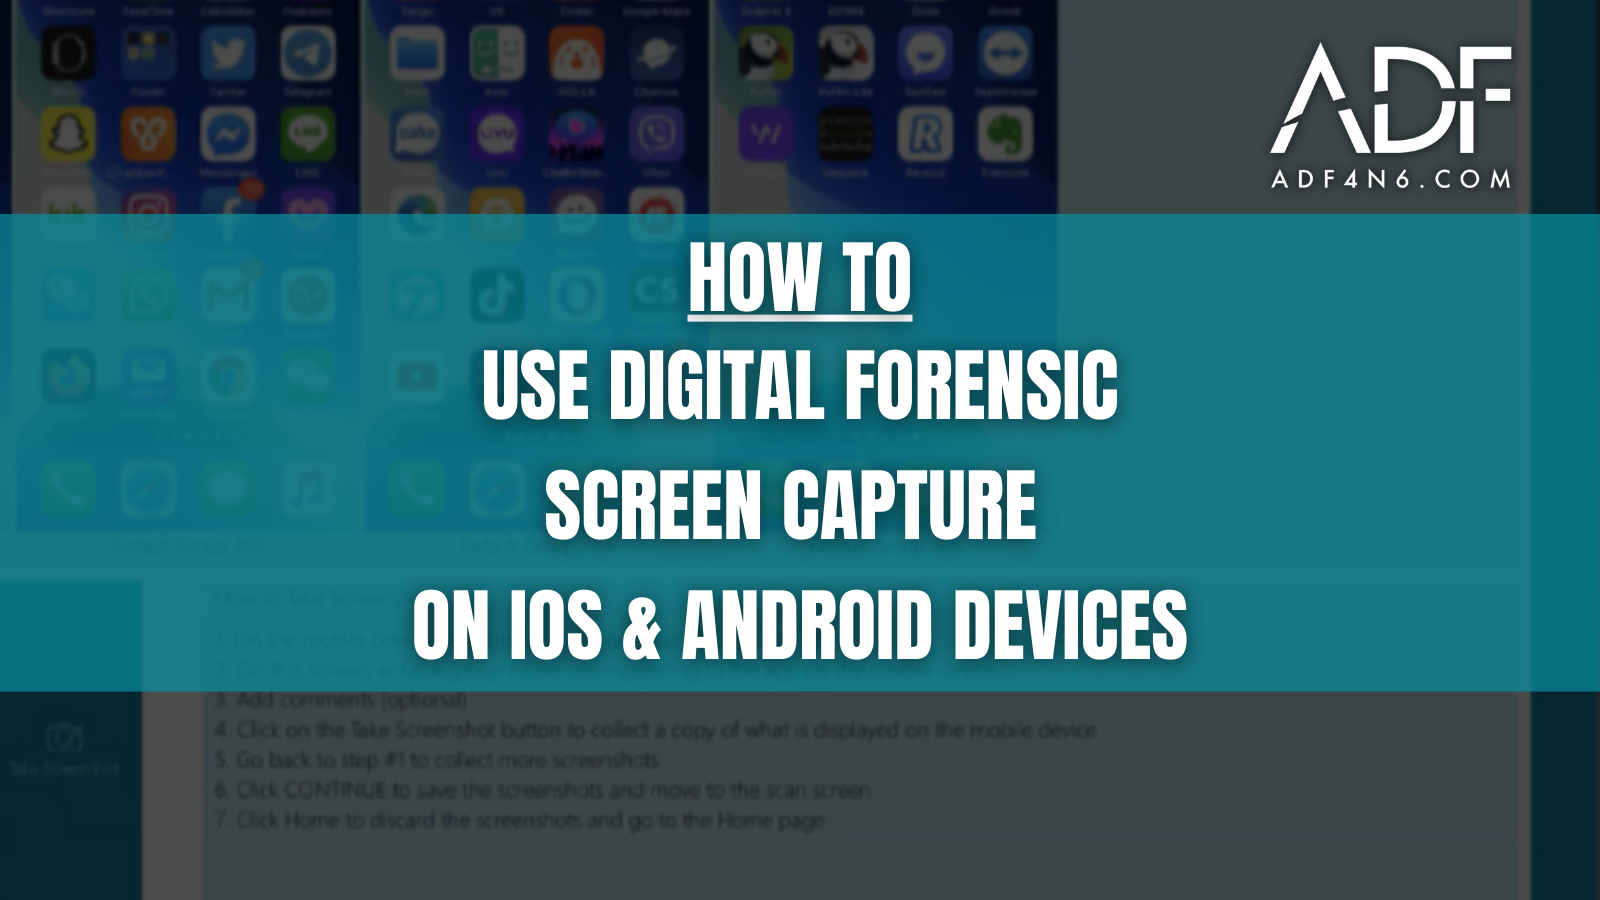 Learn To Use Digital Forensic Screen Capture on iOS & Android Devices (Updated in 2022)